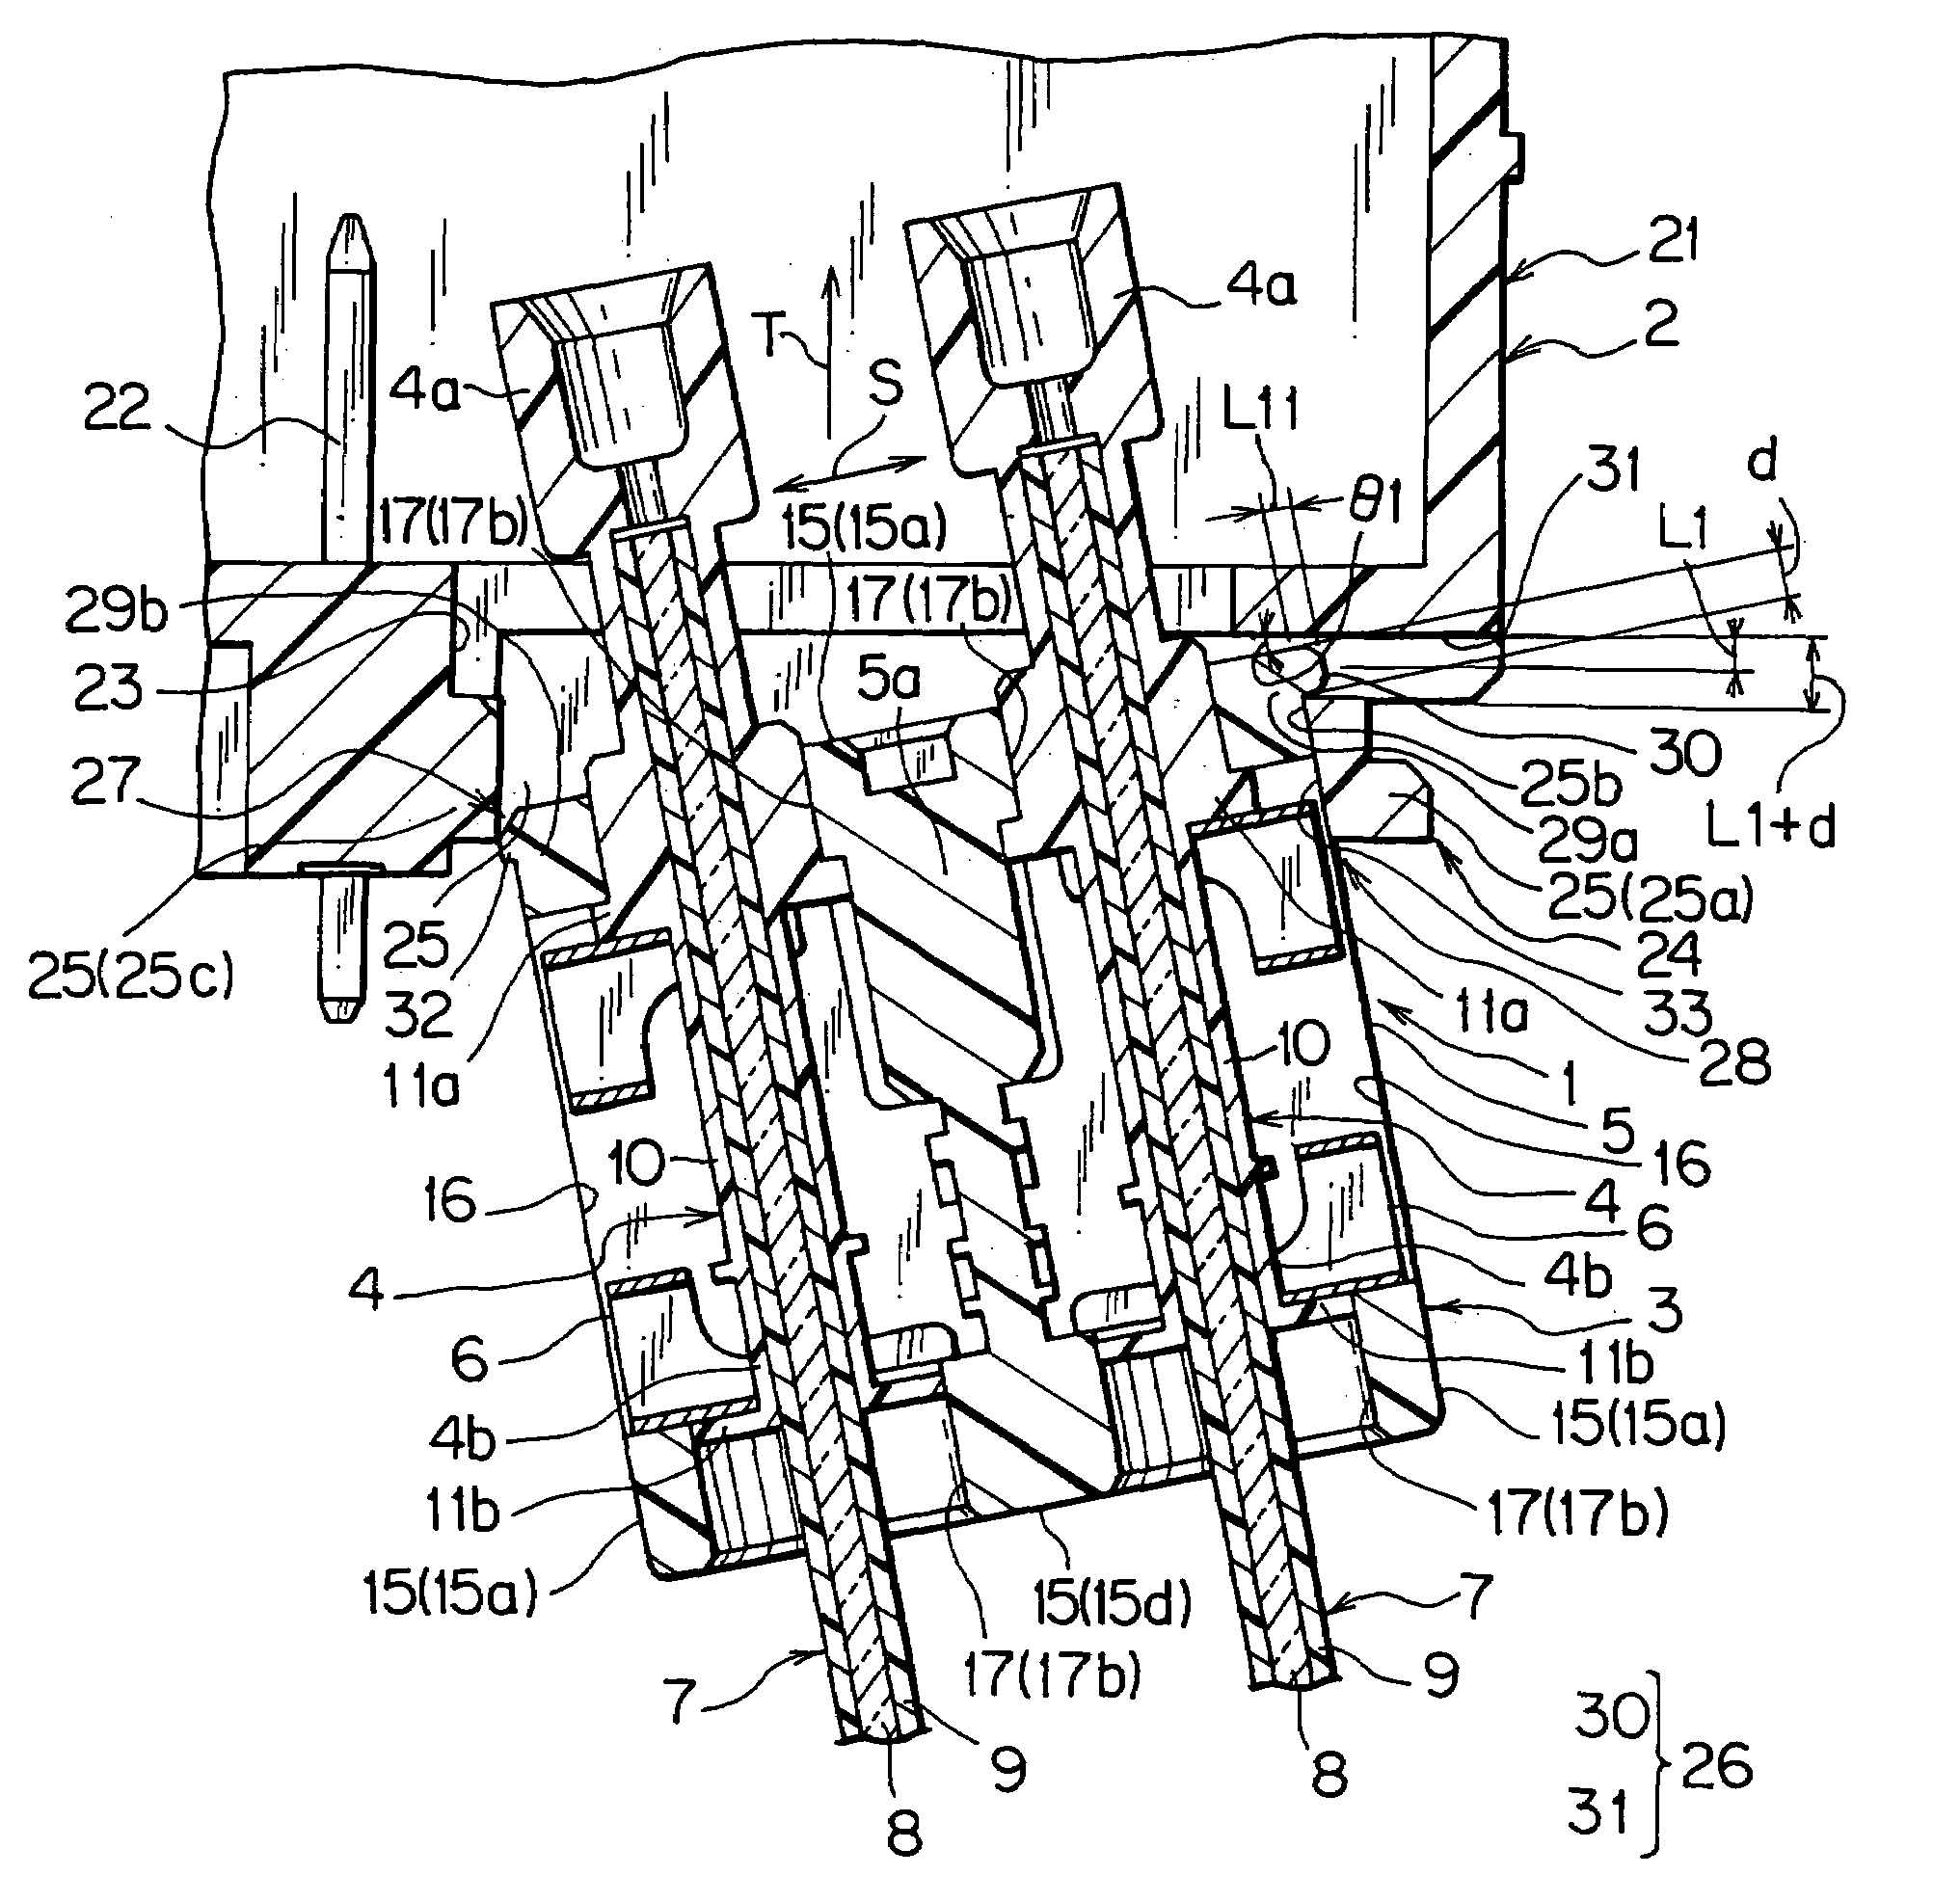 Structure of removable electrical connector